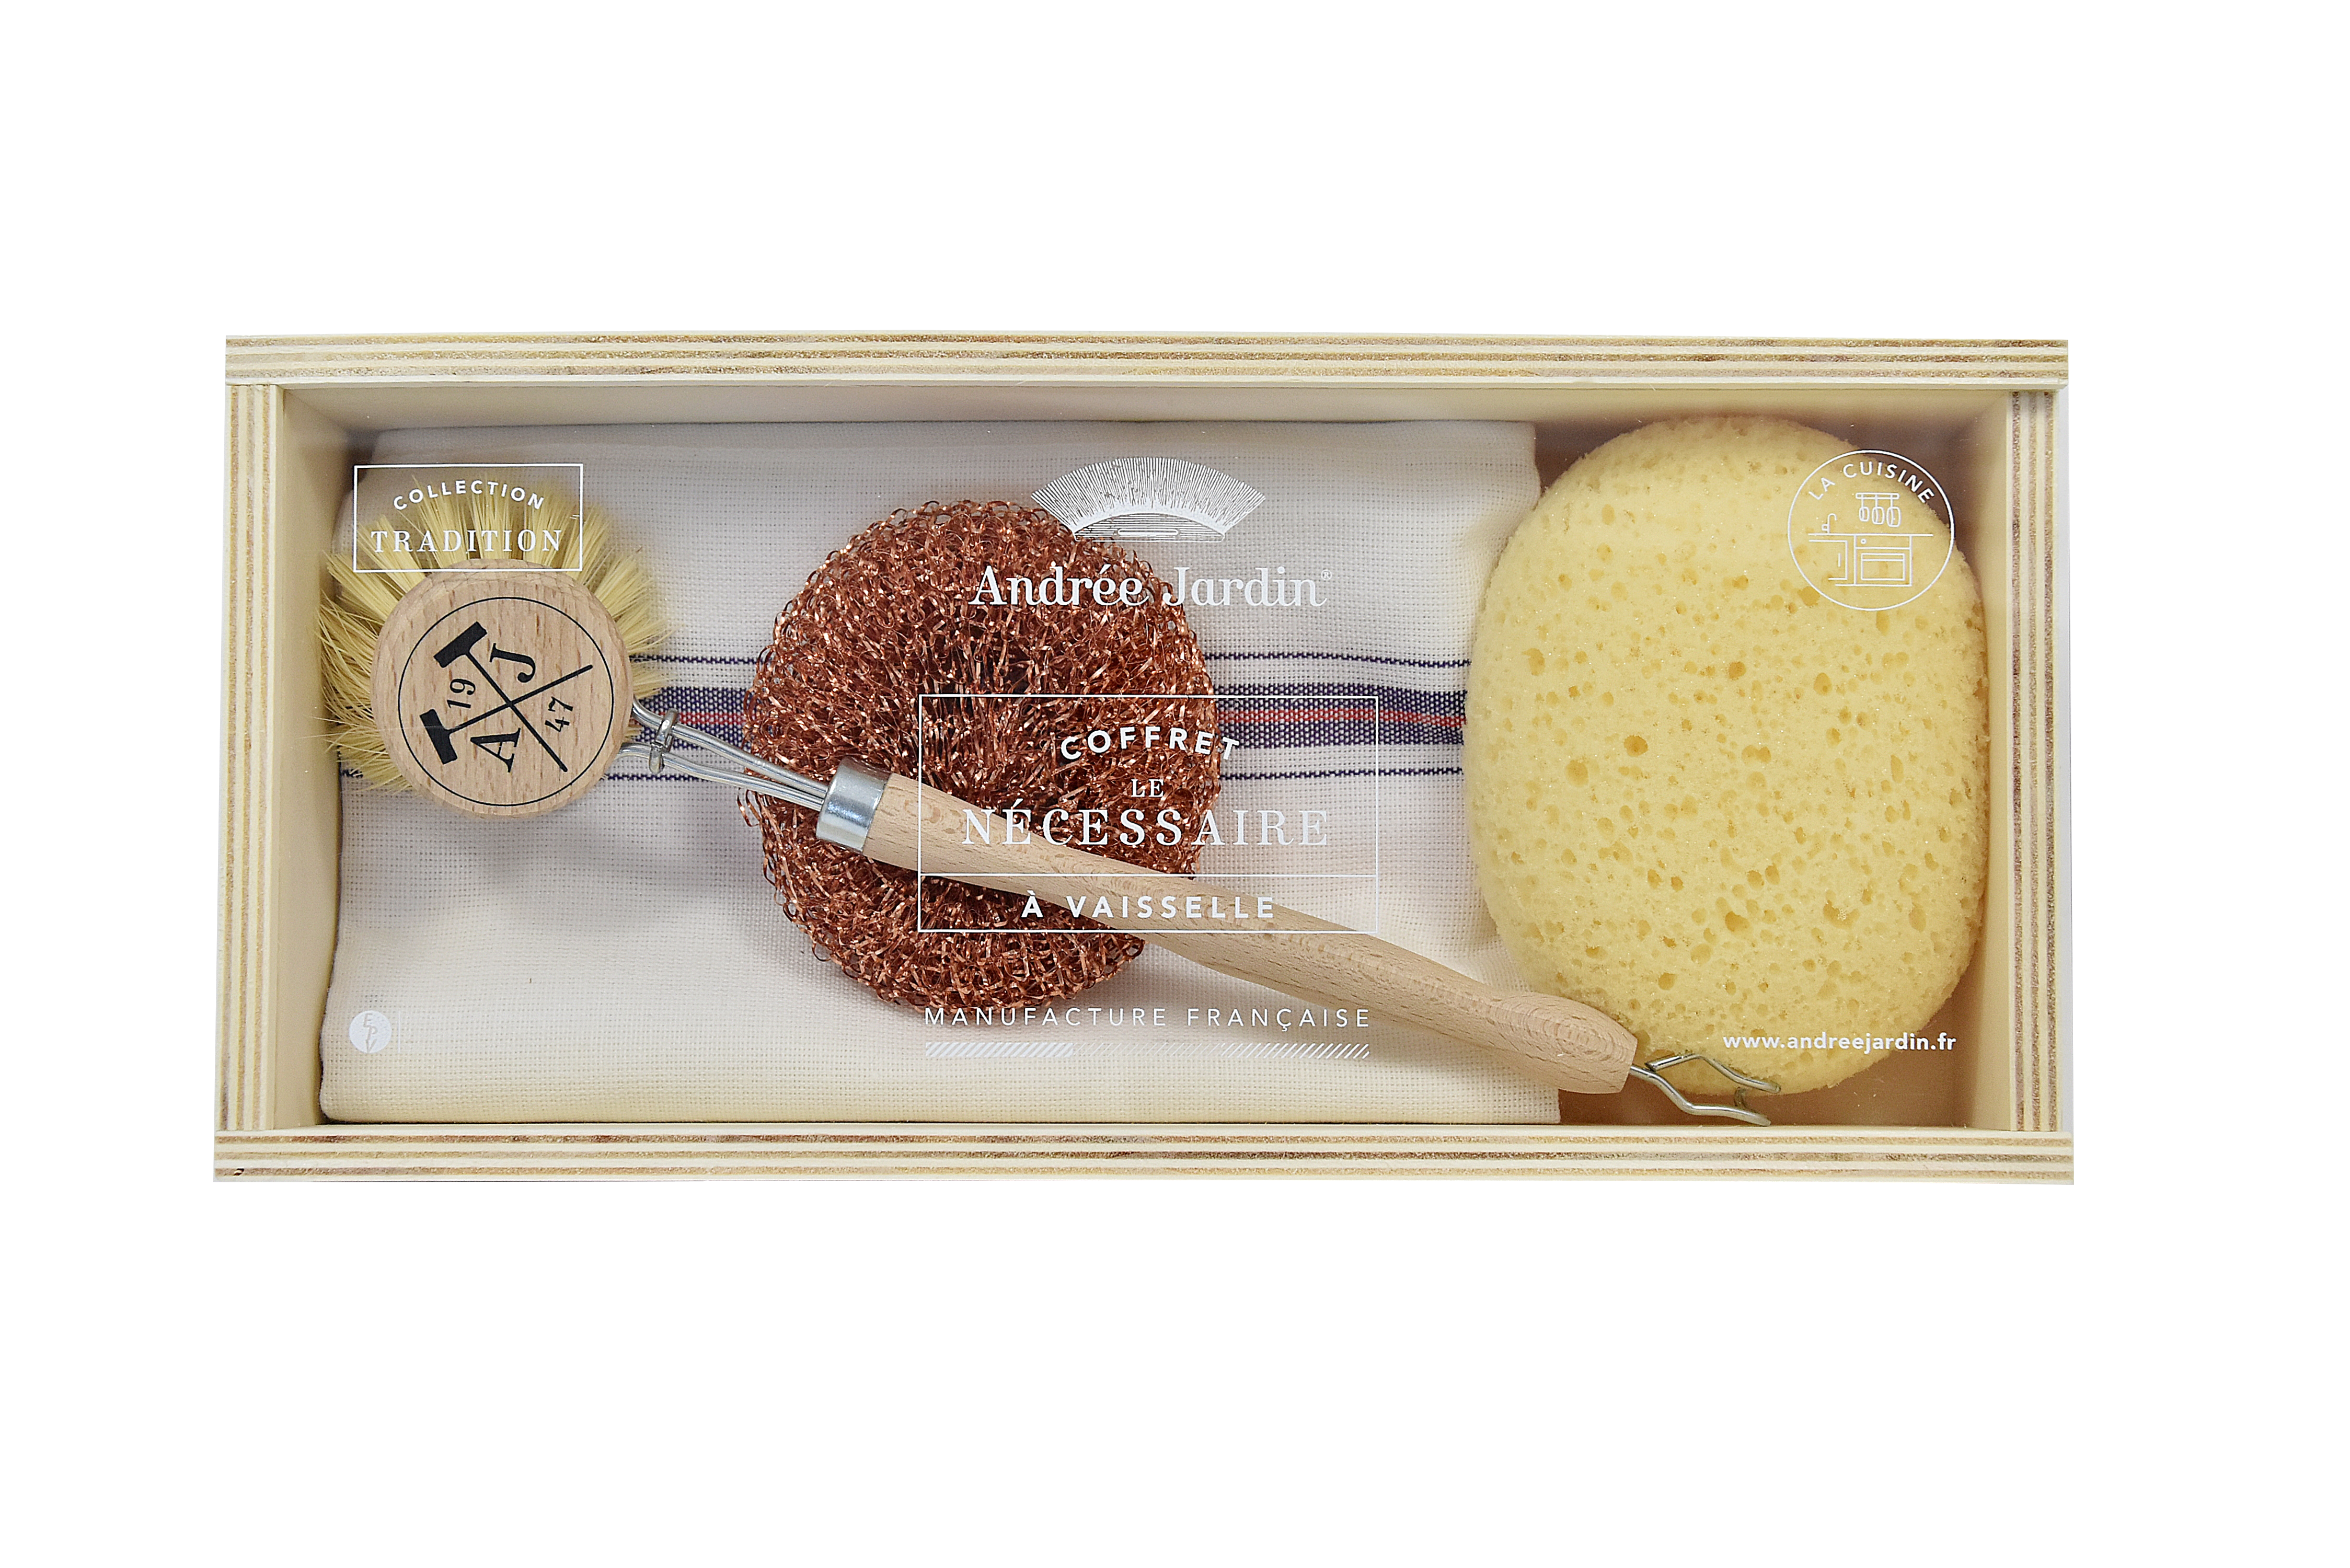 Andrée Jardin "Tradition" Dish Kit in Wooden Box Andrée Jardin Andrée Jardin Back in stock Brand_Andrée Jardin Home_Household Cleaning Kitchen_Accessories Kitchen_Kitchenware La Cuisine Necessaire-Vaisselle_300DPI